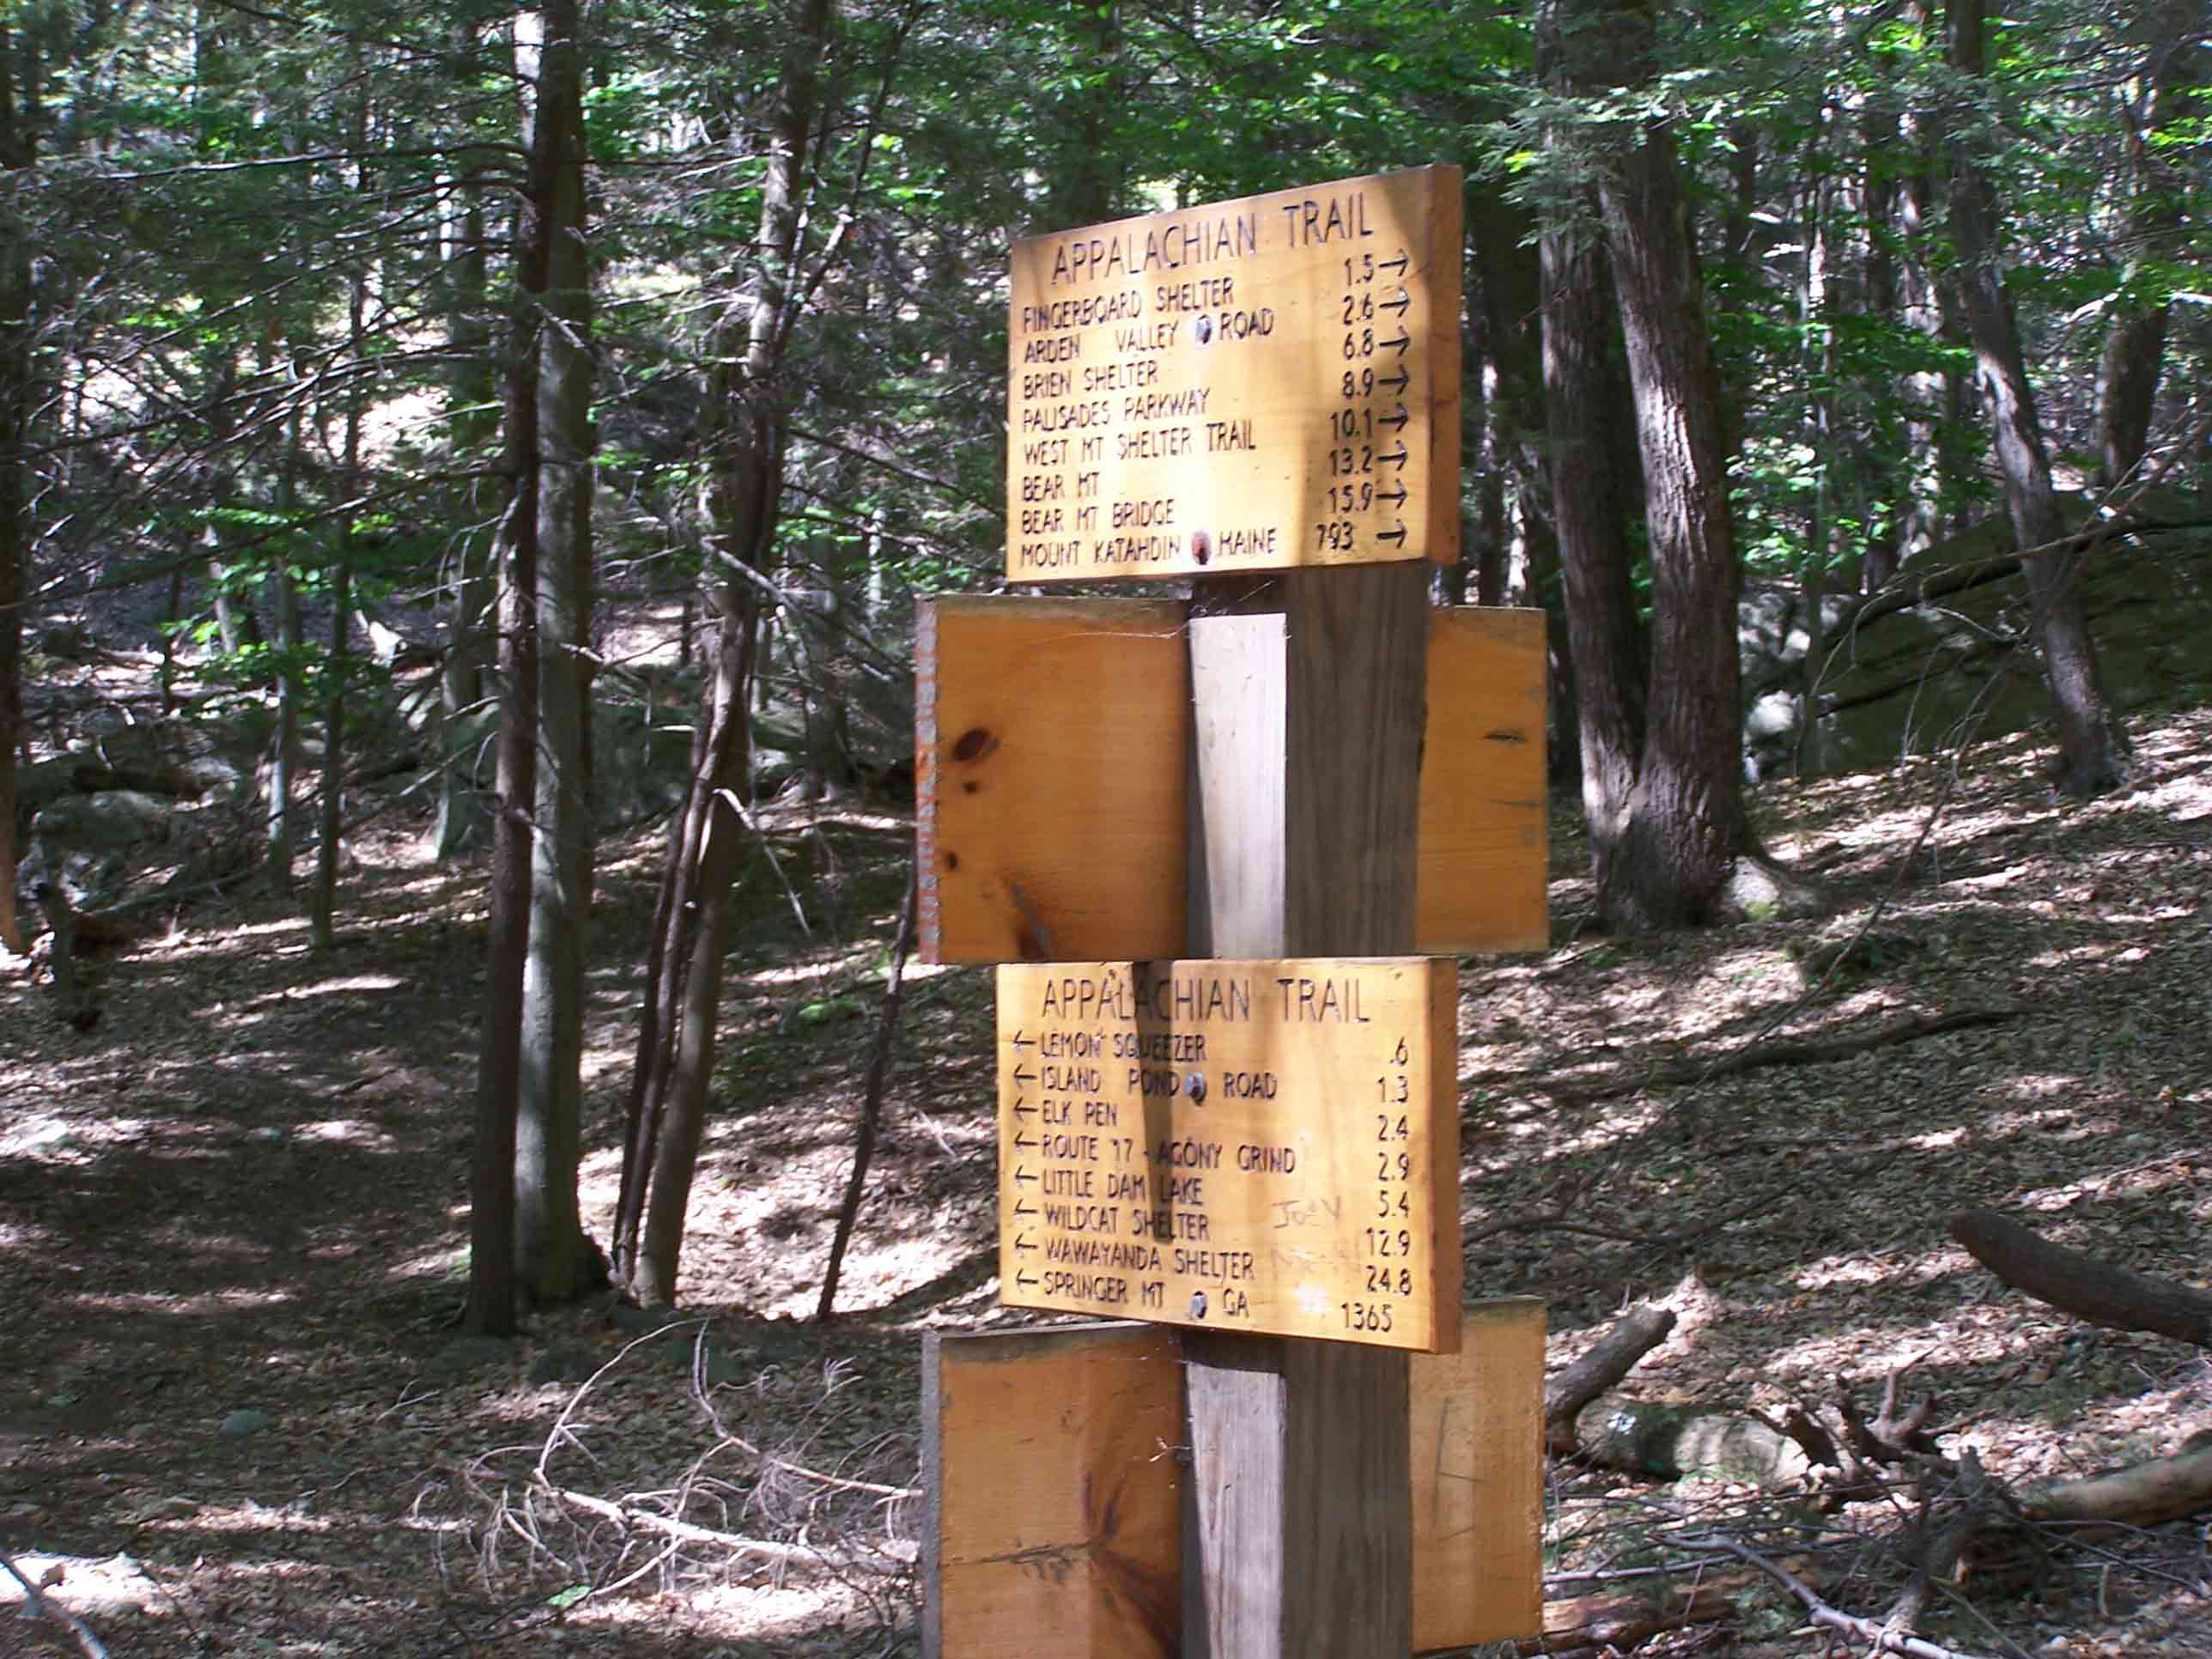 mm 2.6 - Trail sign post. Courtesy at@rohland.org